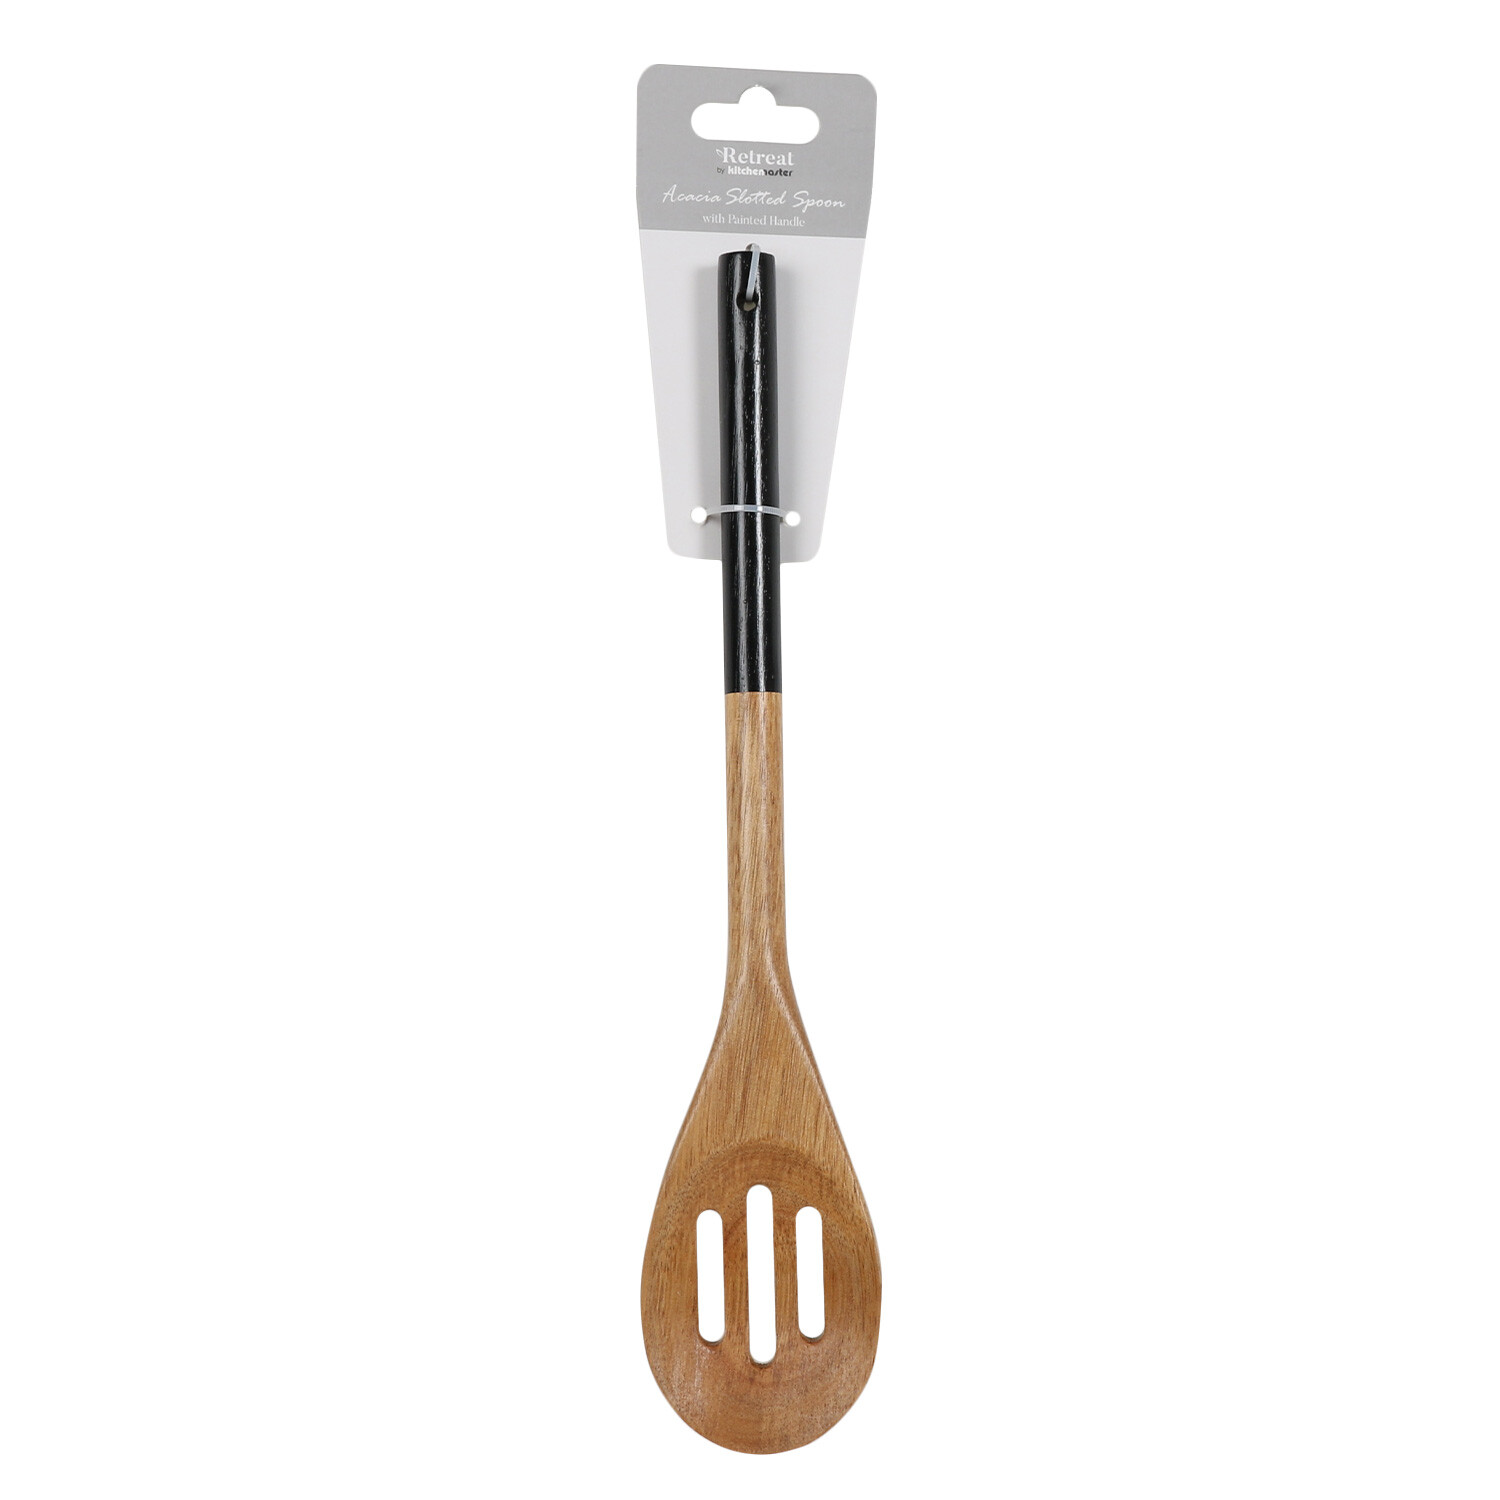 Acacia Slotted Spoon with Painted Handle - Black Image